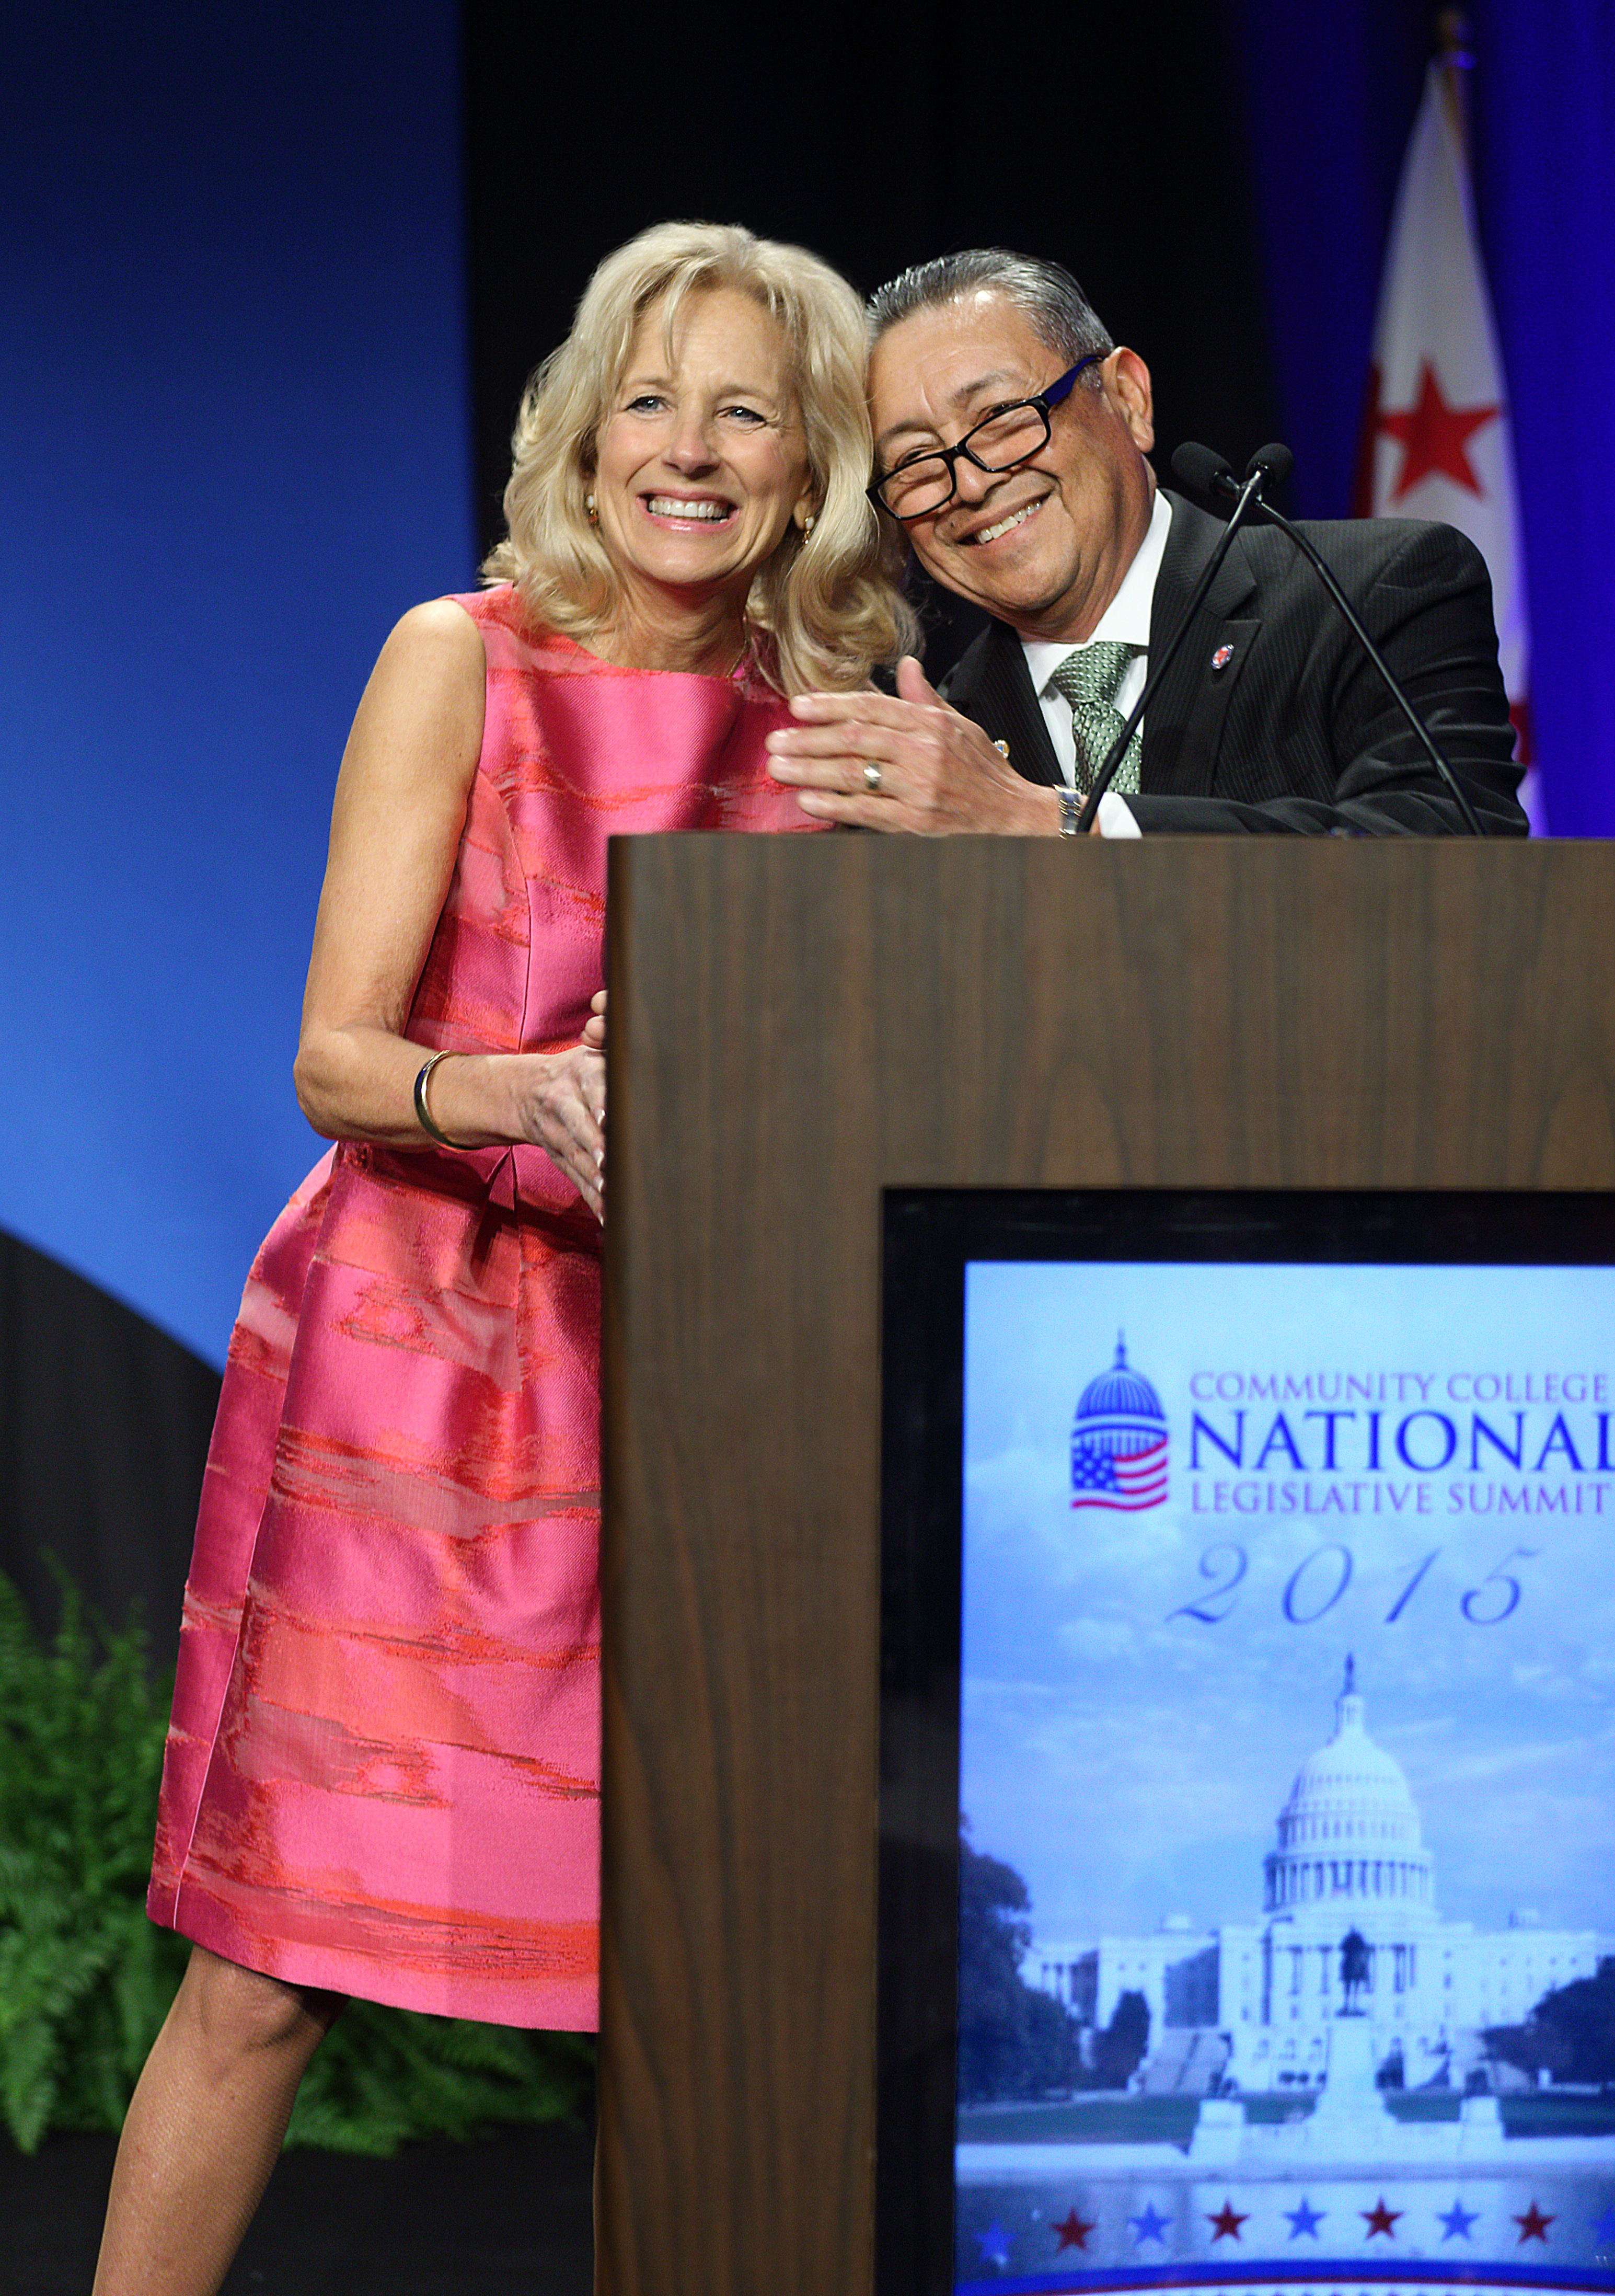 Roberto Zárate Introduces Dr. Jill Biden at the 2015 Community College National Legislative Summit